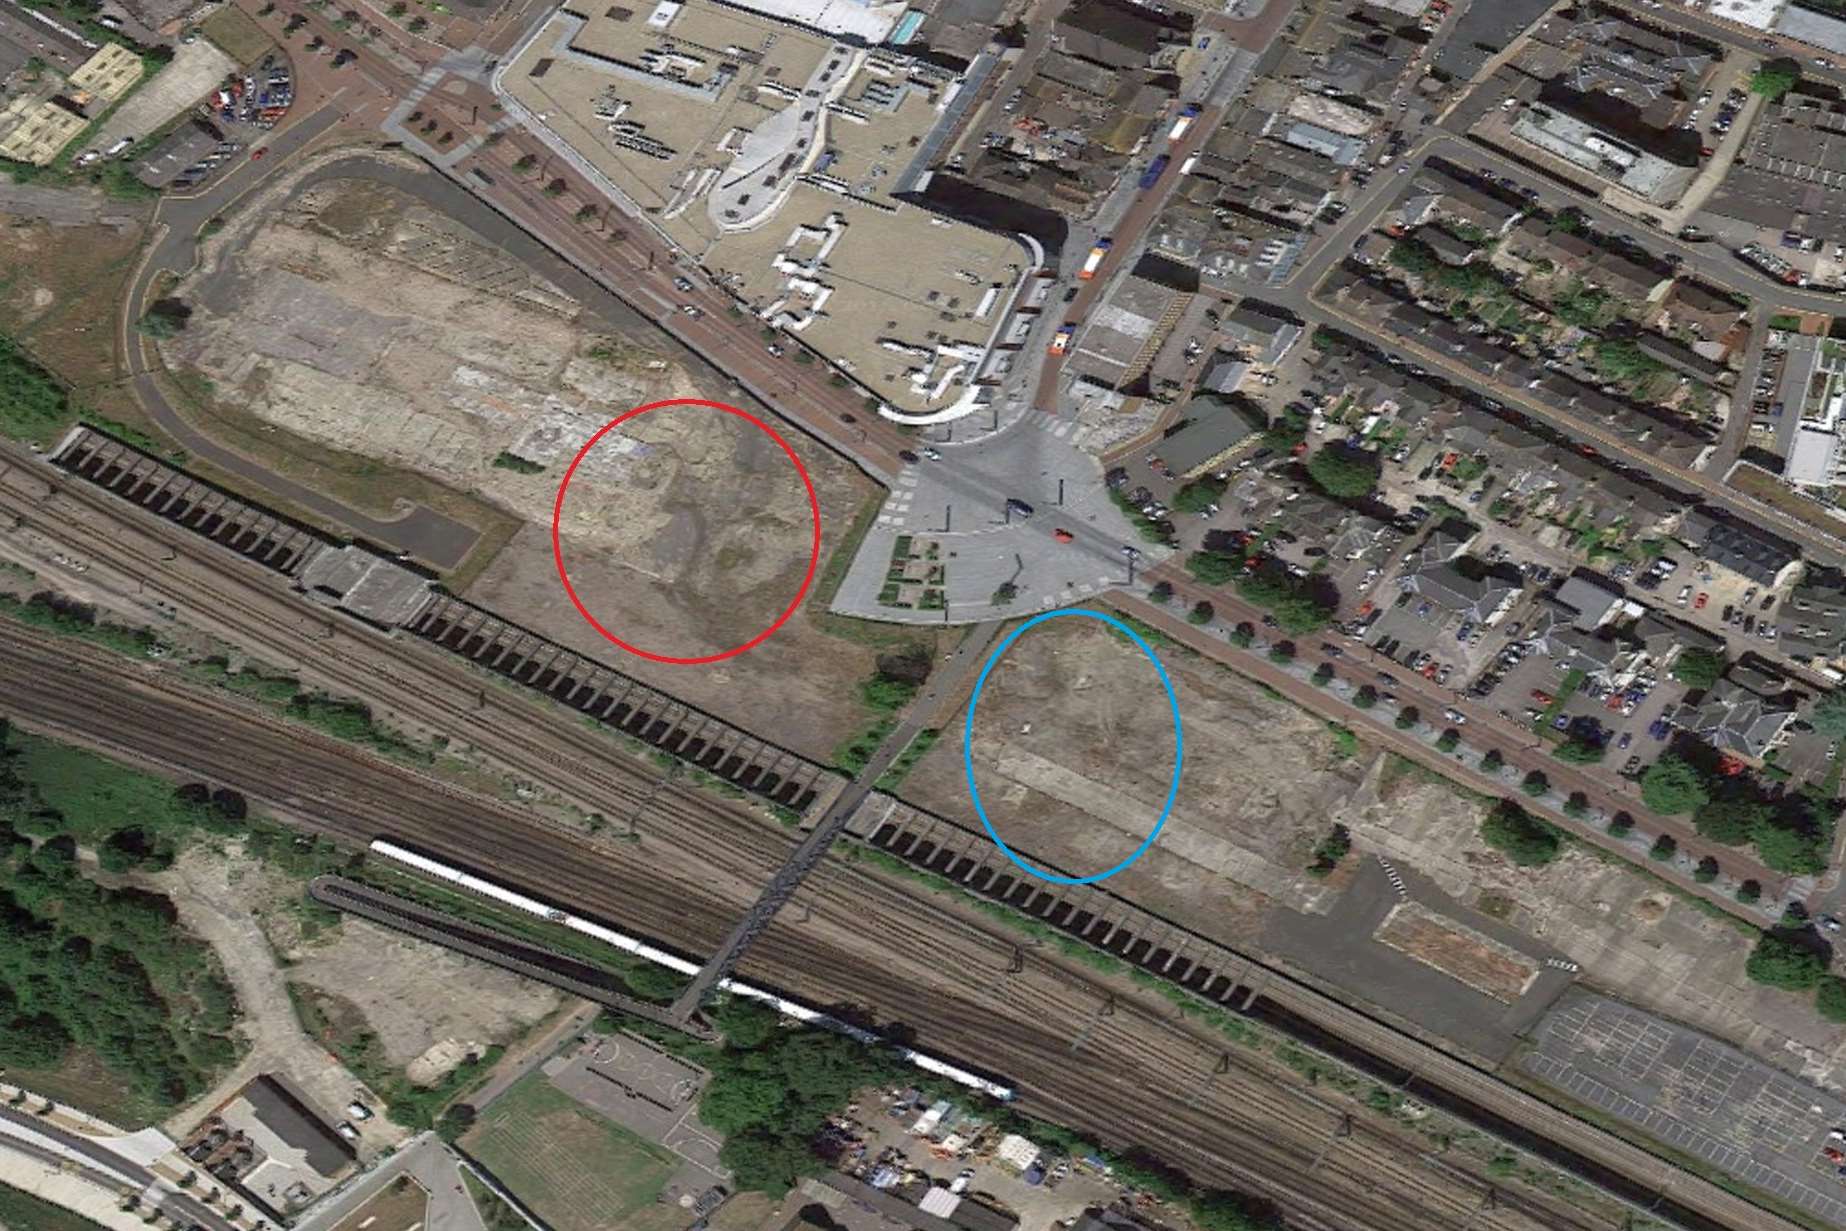 An aerial view of the site. The red circle shows where the cinema and restaurants would go, and the blue where the hotel would